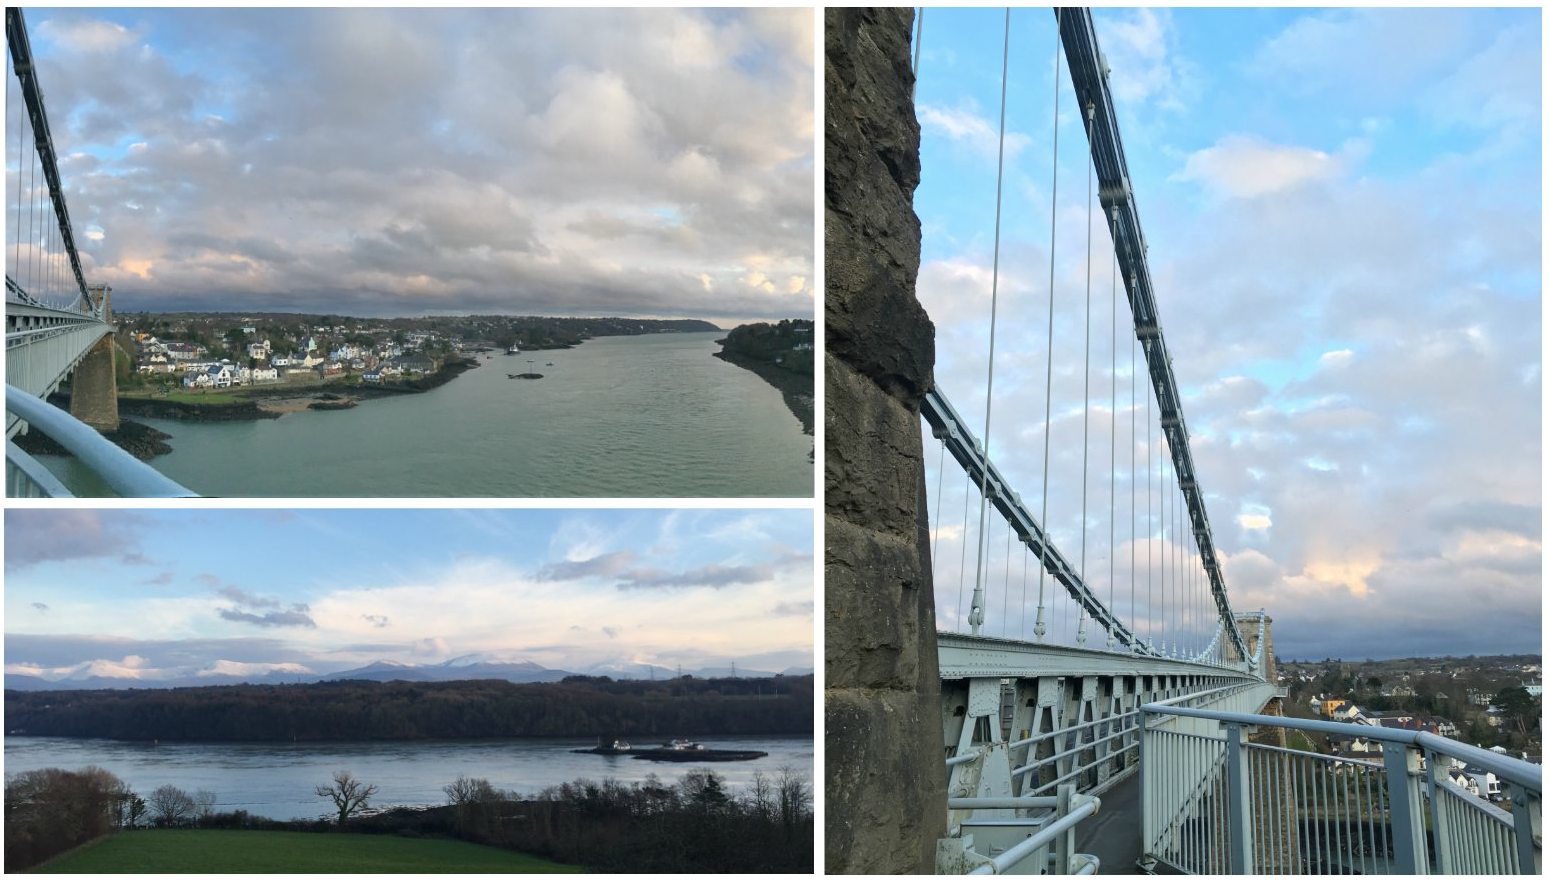 Wander-full Wales Weekend - Travel with Penelope & Parker